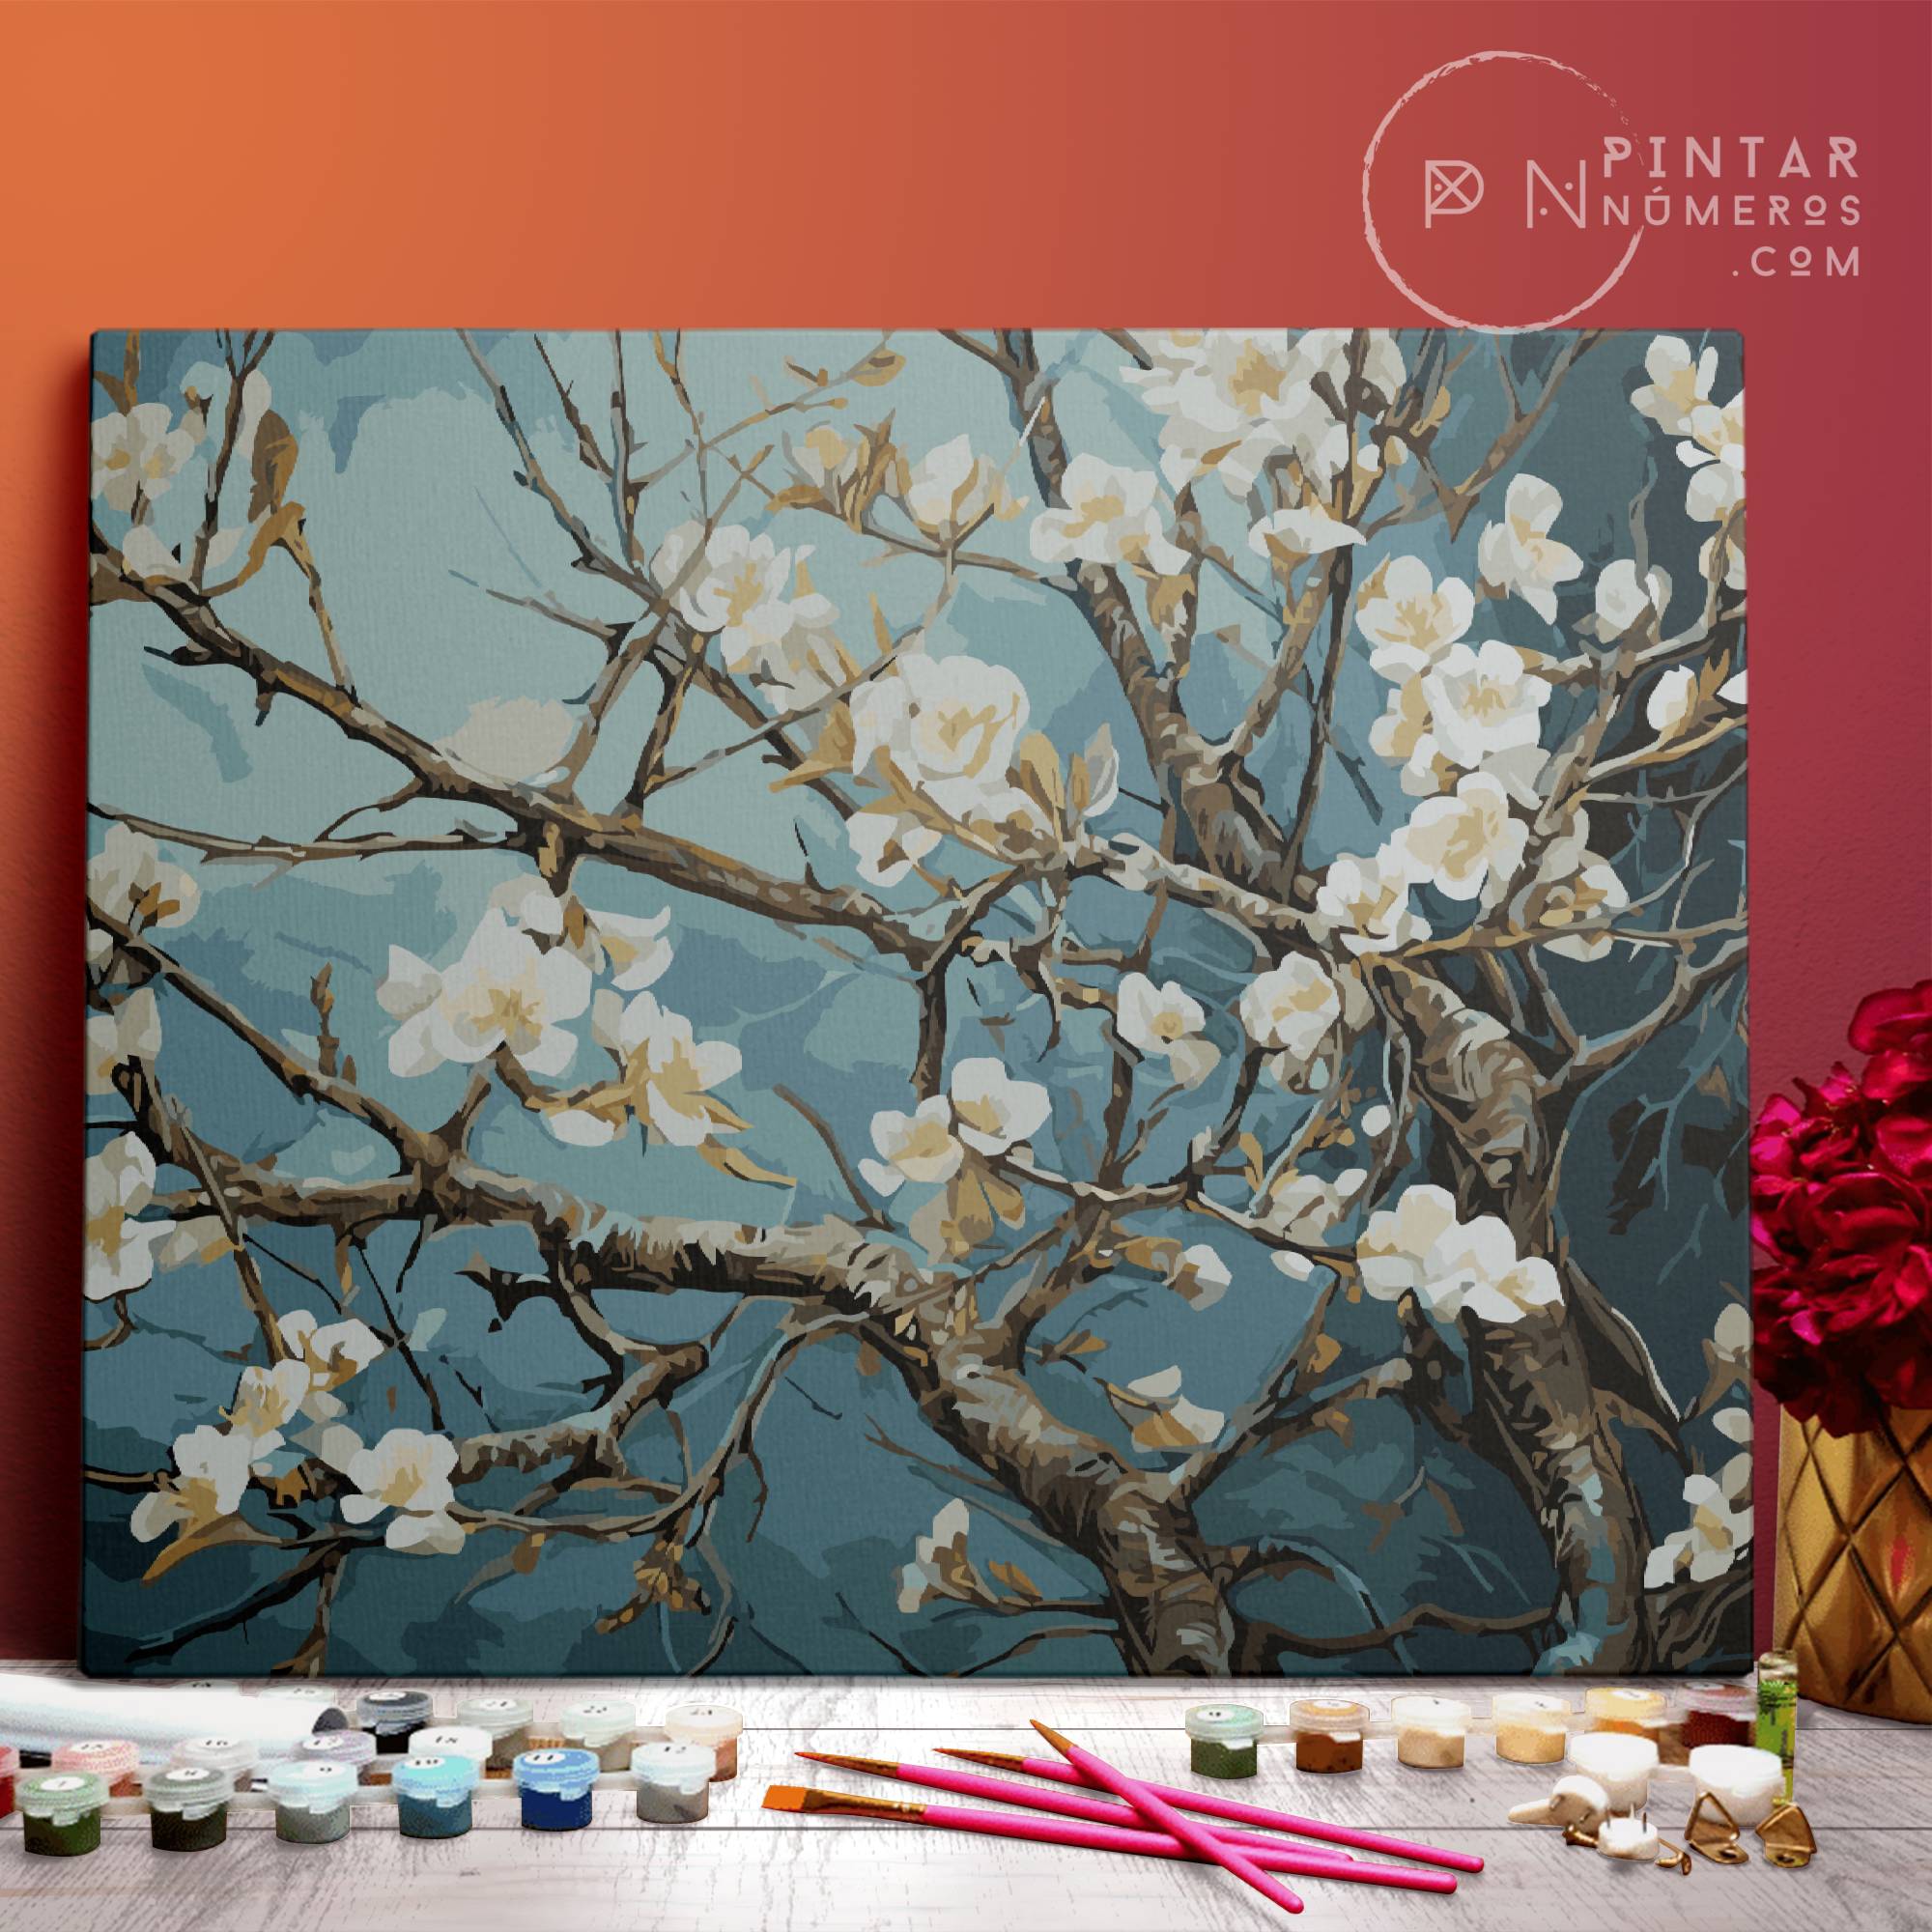 Almond Blossom. - Paint Numbers® 